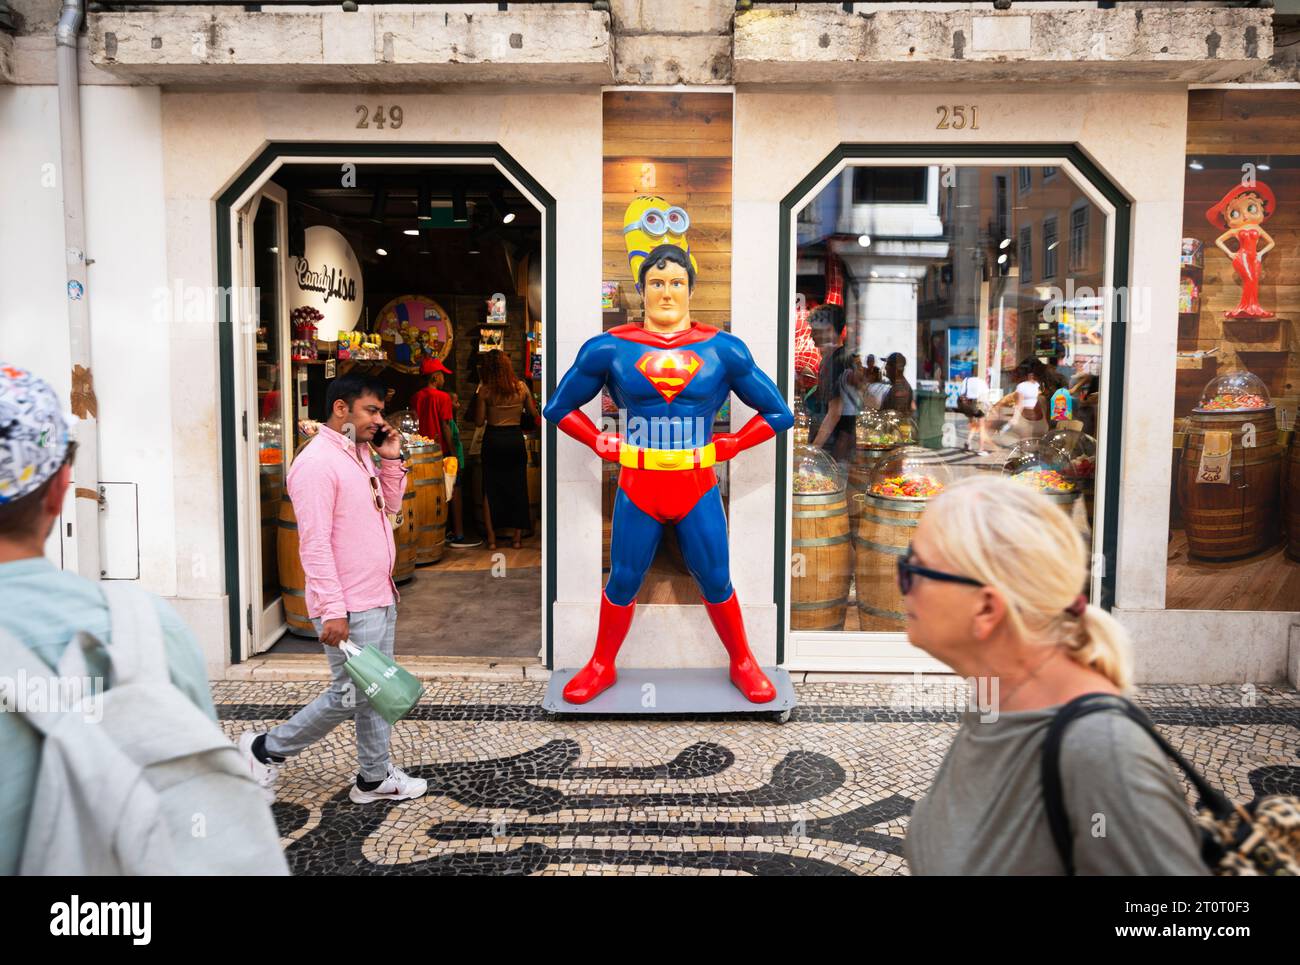 Rua Augusta, Lisbon Portugal, a Superman mannequin at the entrance to Candy Lisa, a Italian retail sweets shop, on Rua Augusta in central Lisbon.  The Italian retailer, with 37 shops in Italy and Europe, marks its brand image with extravagant iconic cartoons and superheroes. Stock Photo